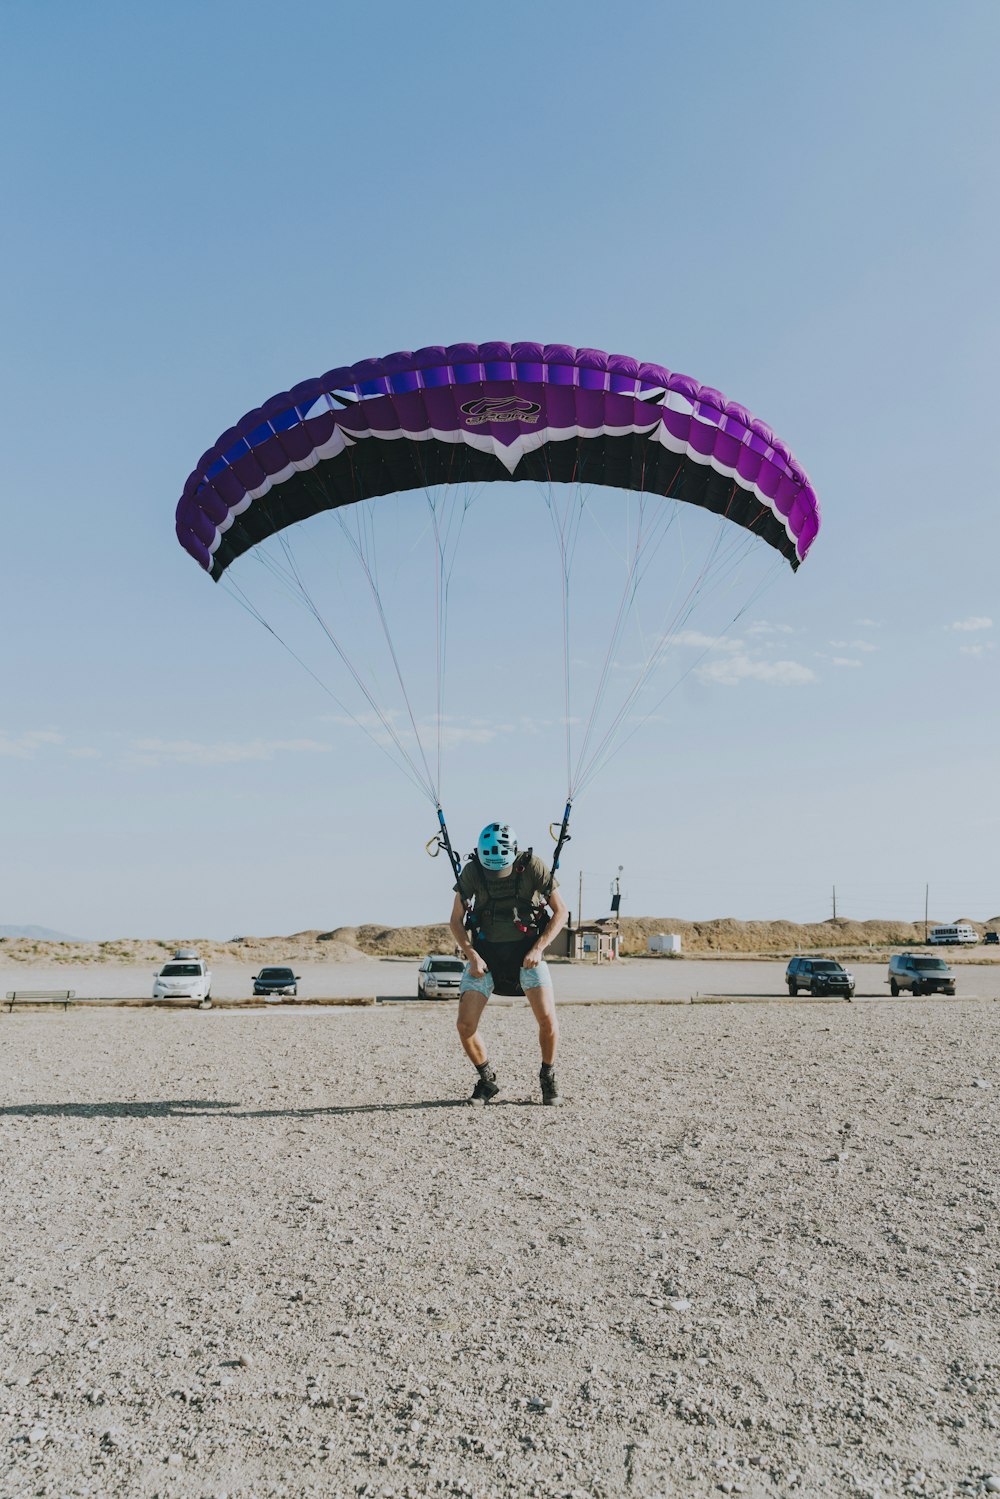 man in black shorts riding on blue and yellow parachute during daytime